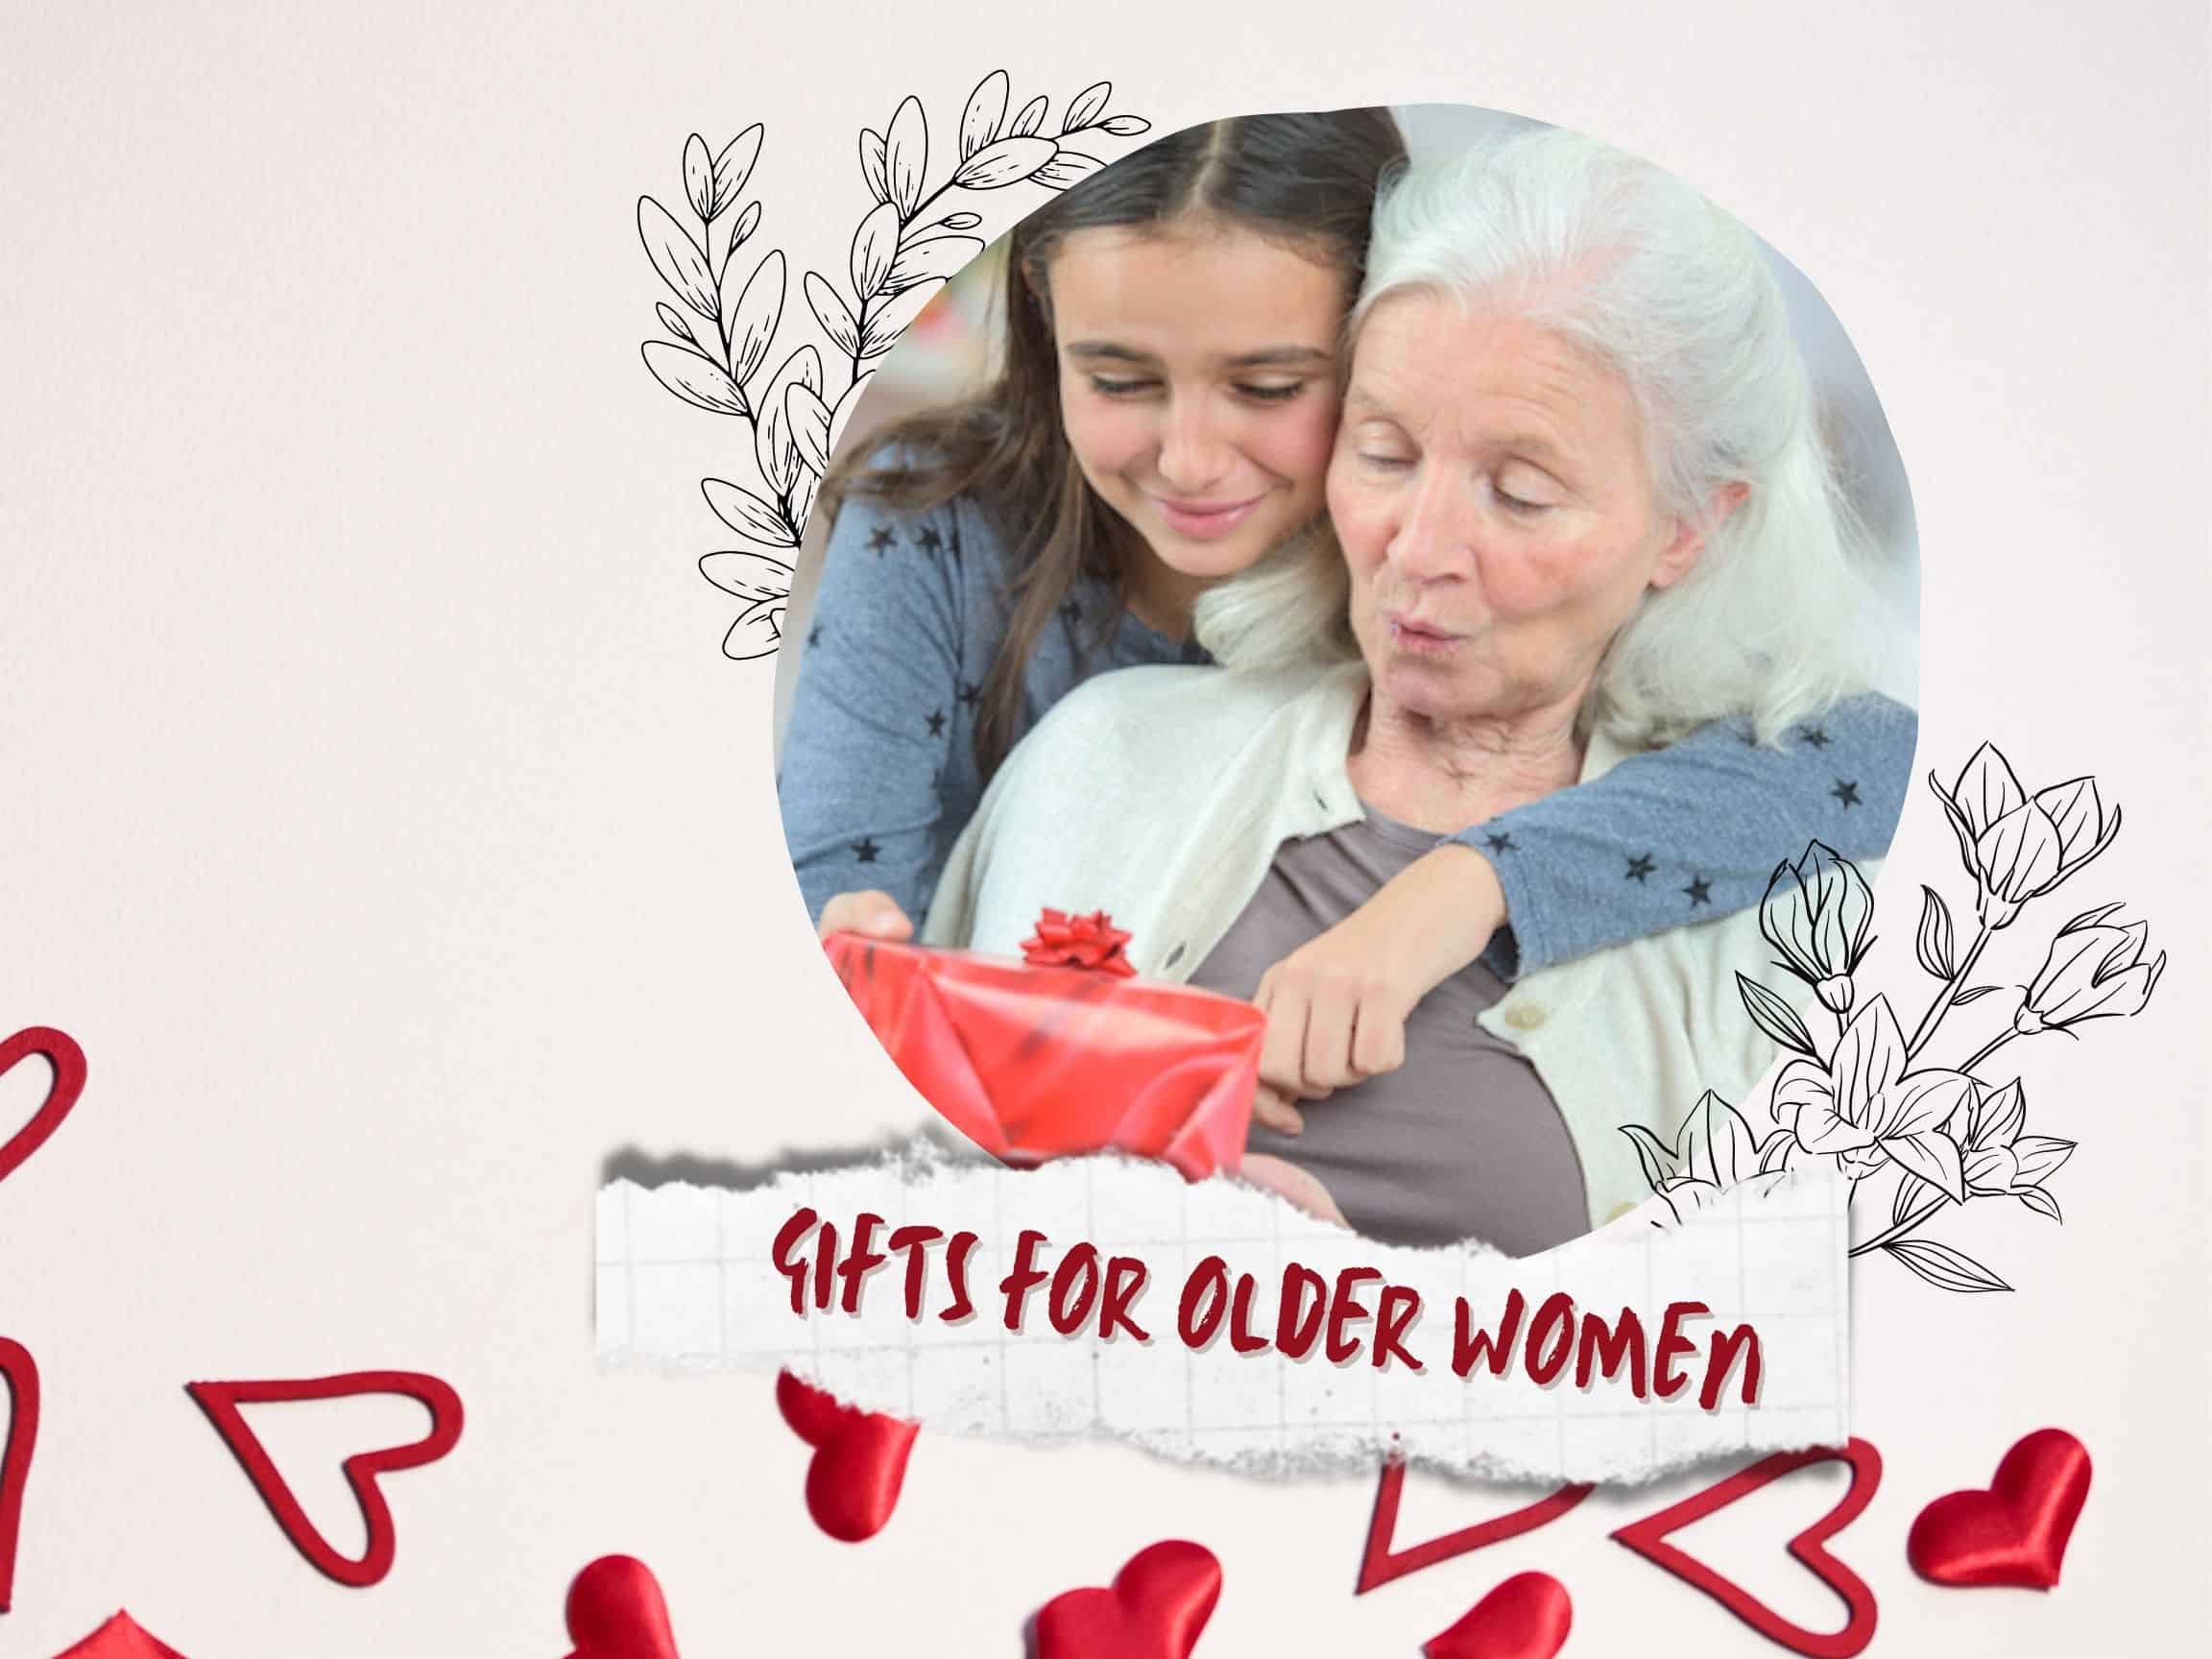 40 Thoughtful Gifts for Older Women for Any Occasion (2022)